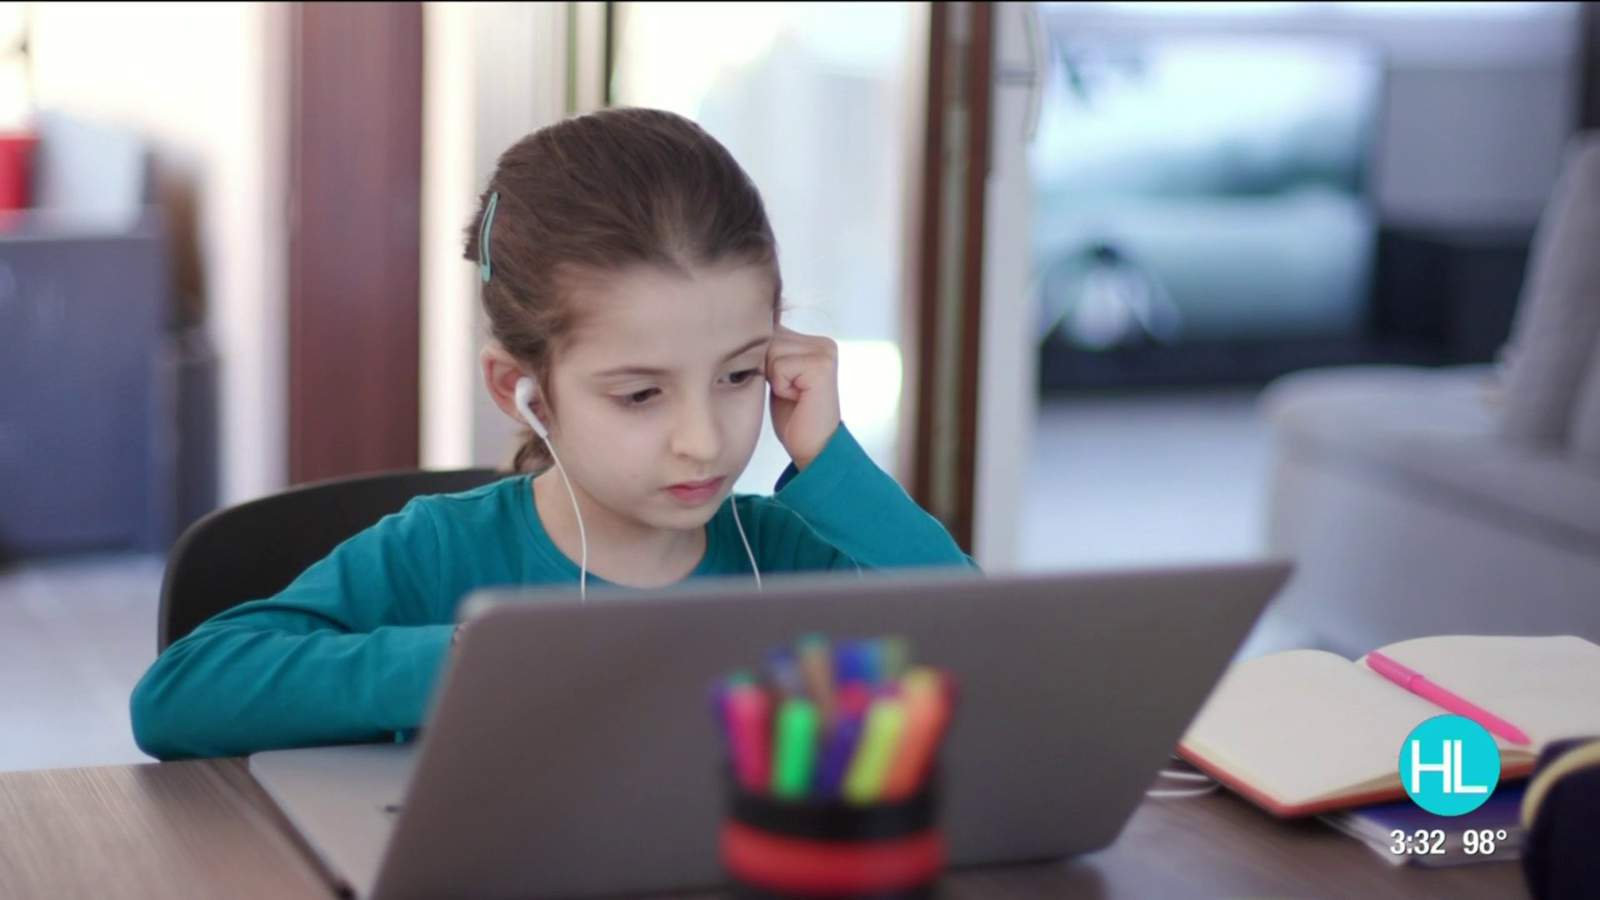 Remote learning and the potential for cyberbullying: What Houston parents should know